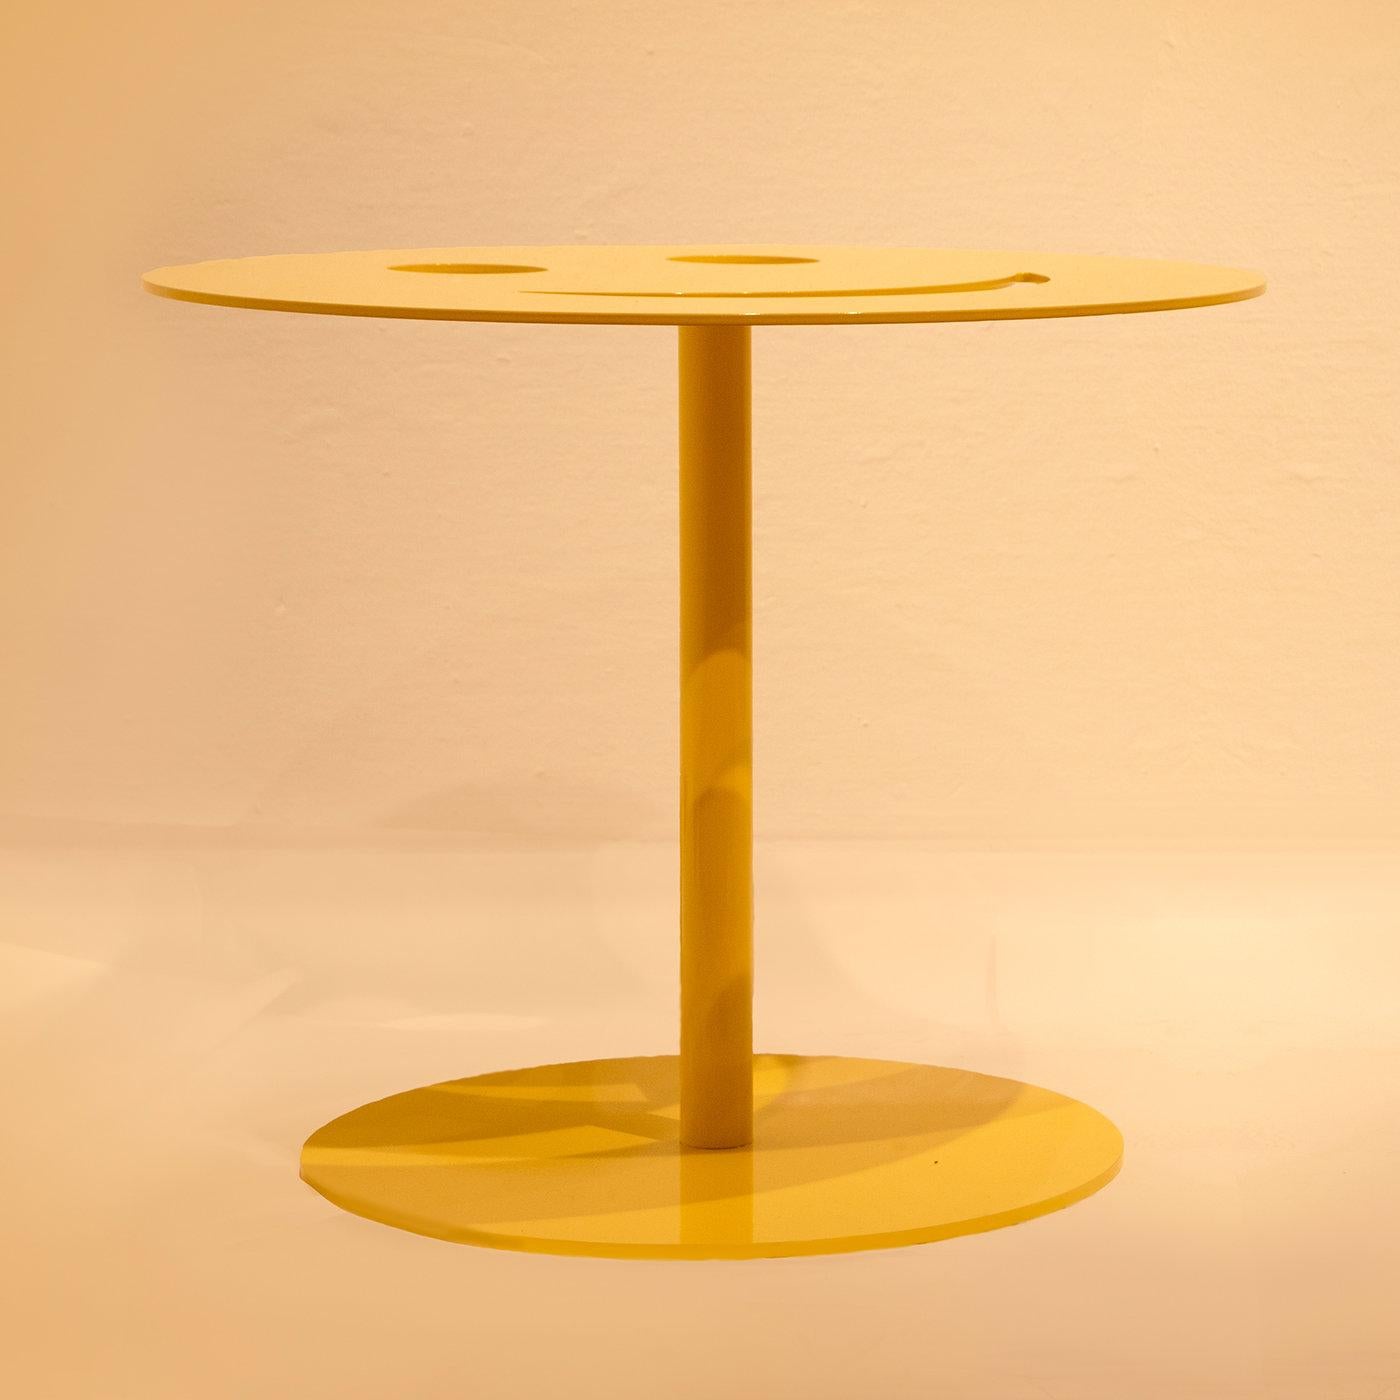 Giulia Maria Ligresti has taken the fun of social media and turned the iconic smiley face symbol into an original and fun statement piece. Handmade of iron with a vibrant yellow finish, this quirky coffee table will give the same happy feeling to